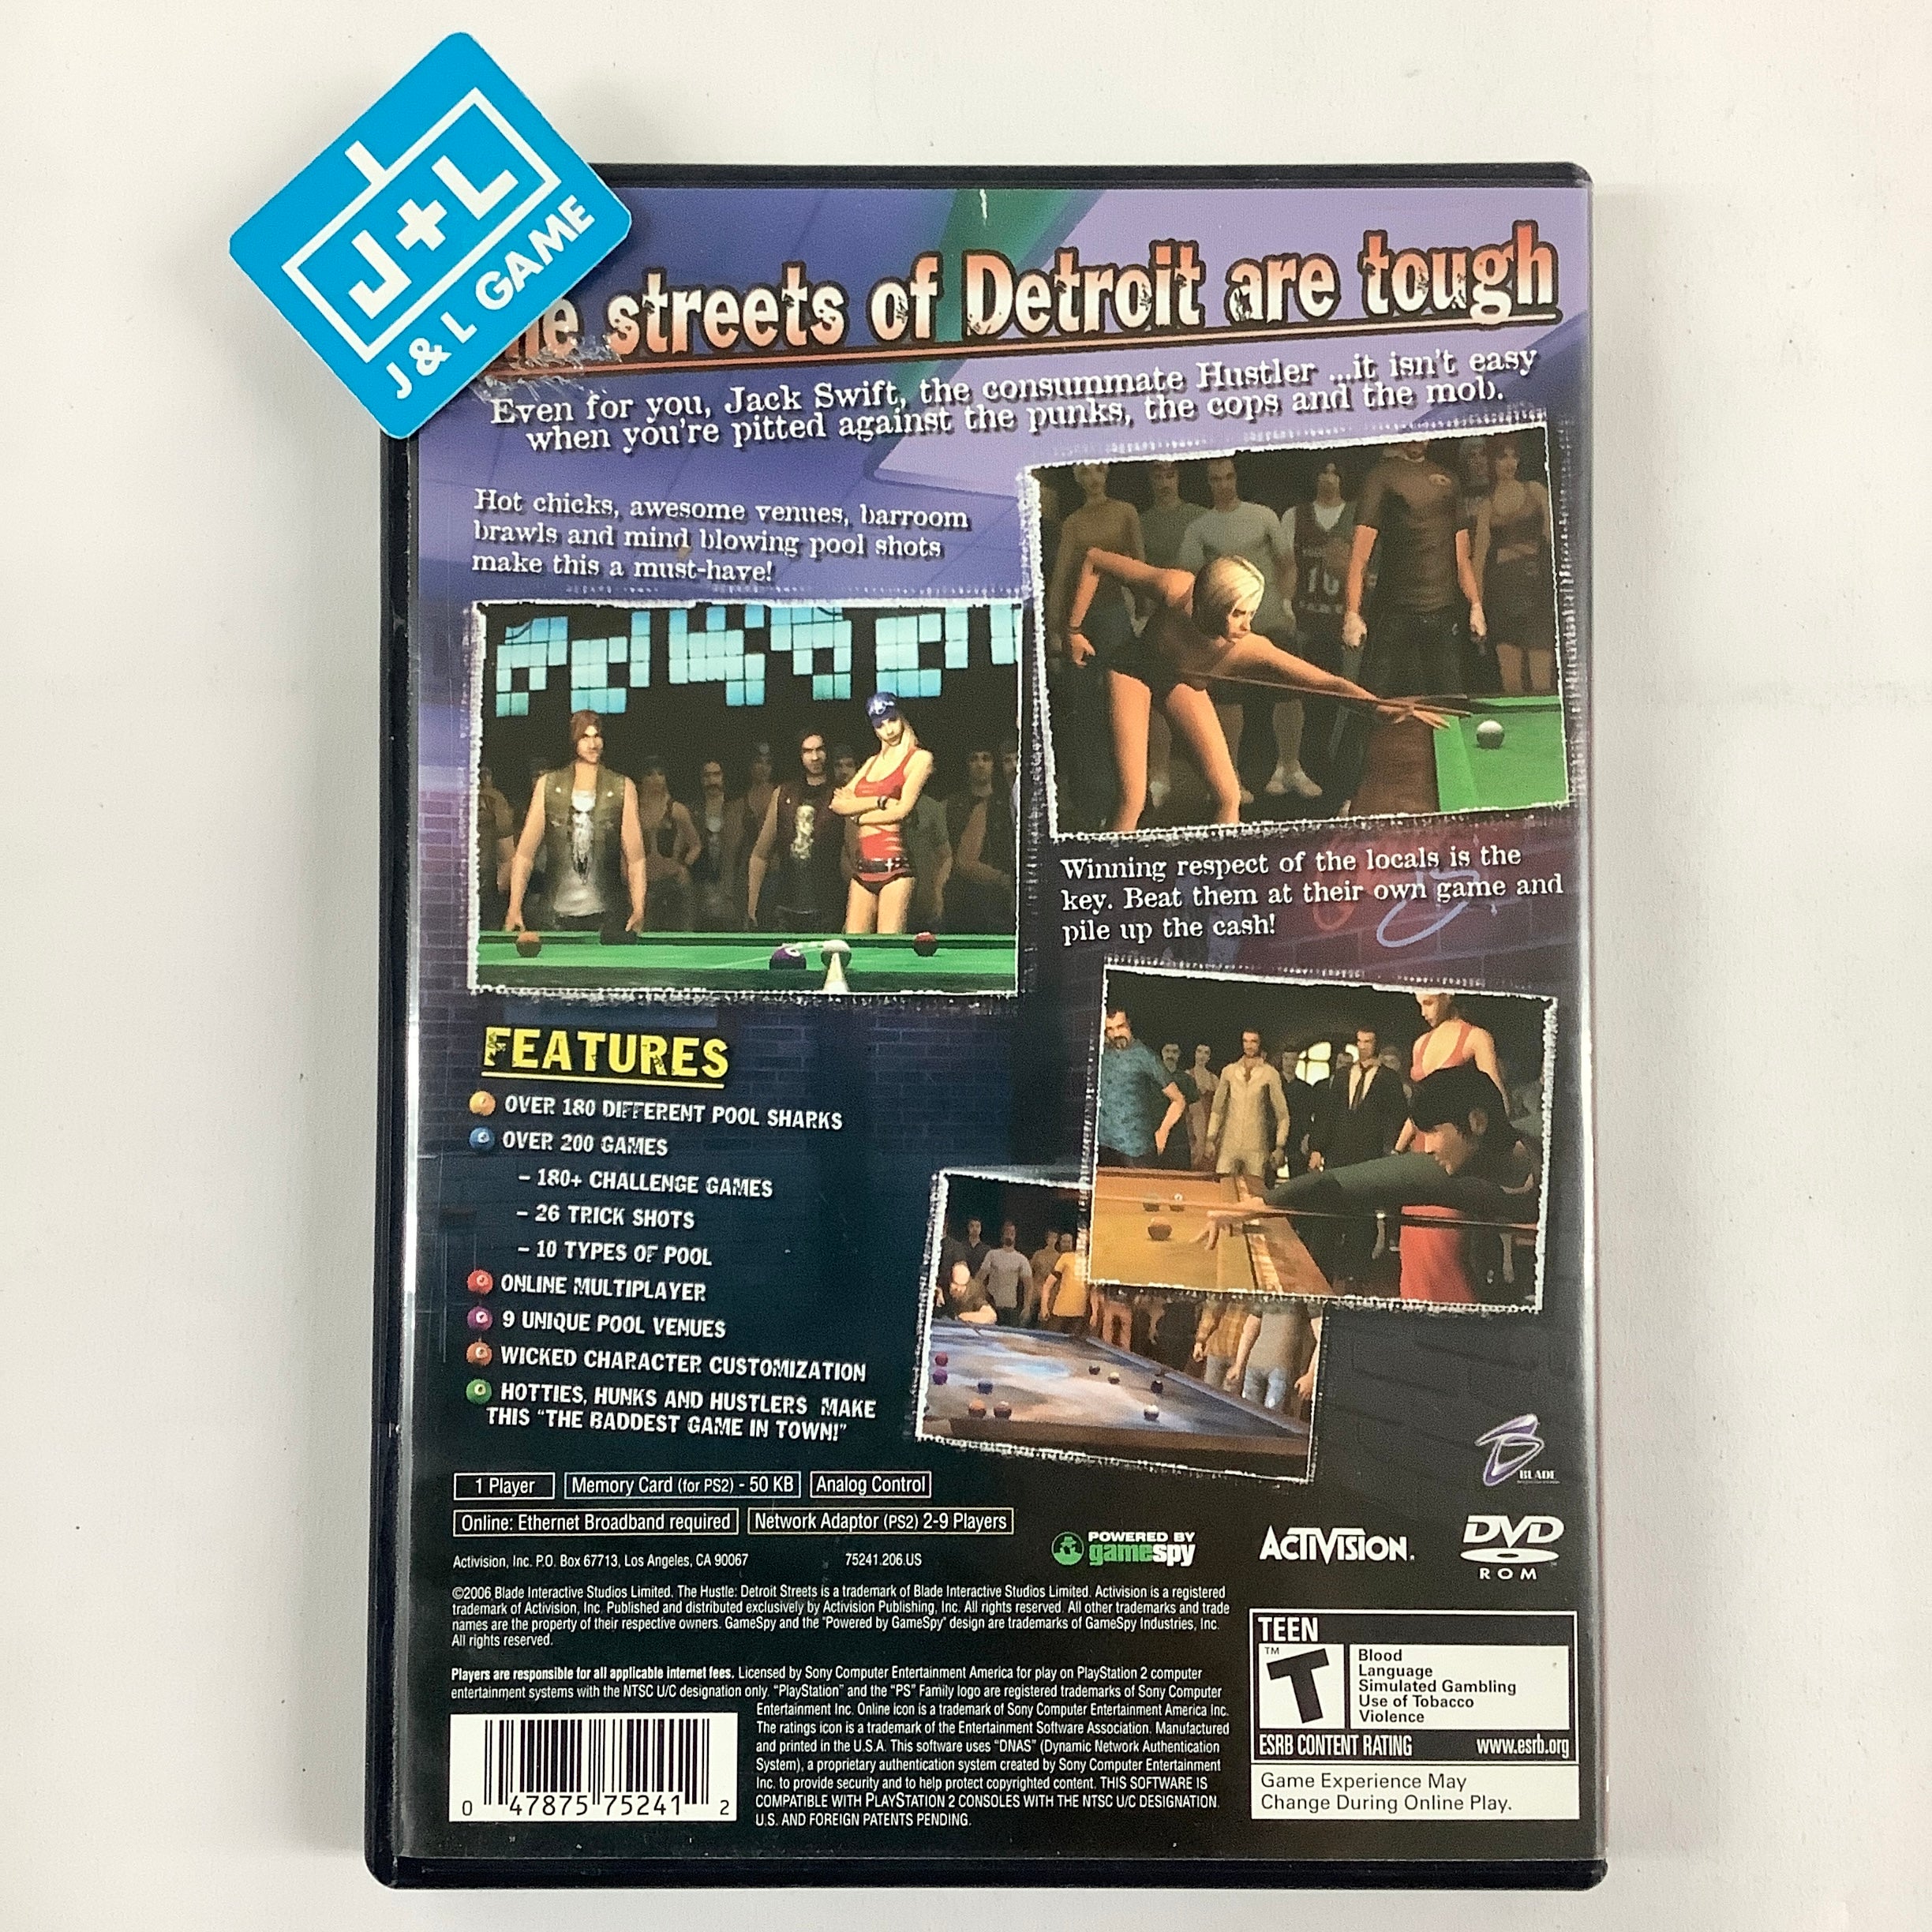 The Hustle: Detroit Streets - (PS2) PlayStation 2 [Pre-Owned] Video Games Activision Value   